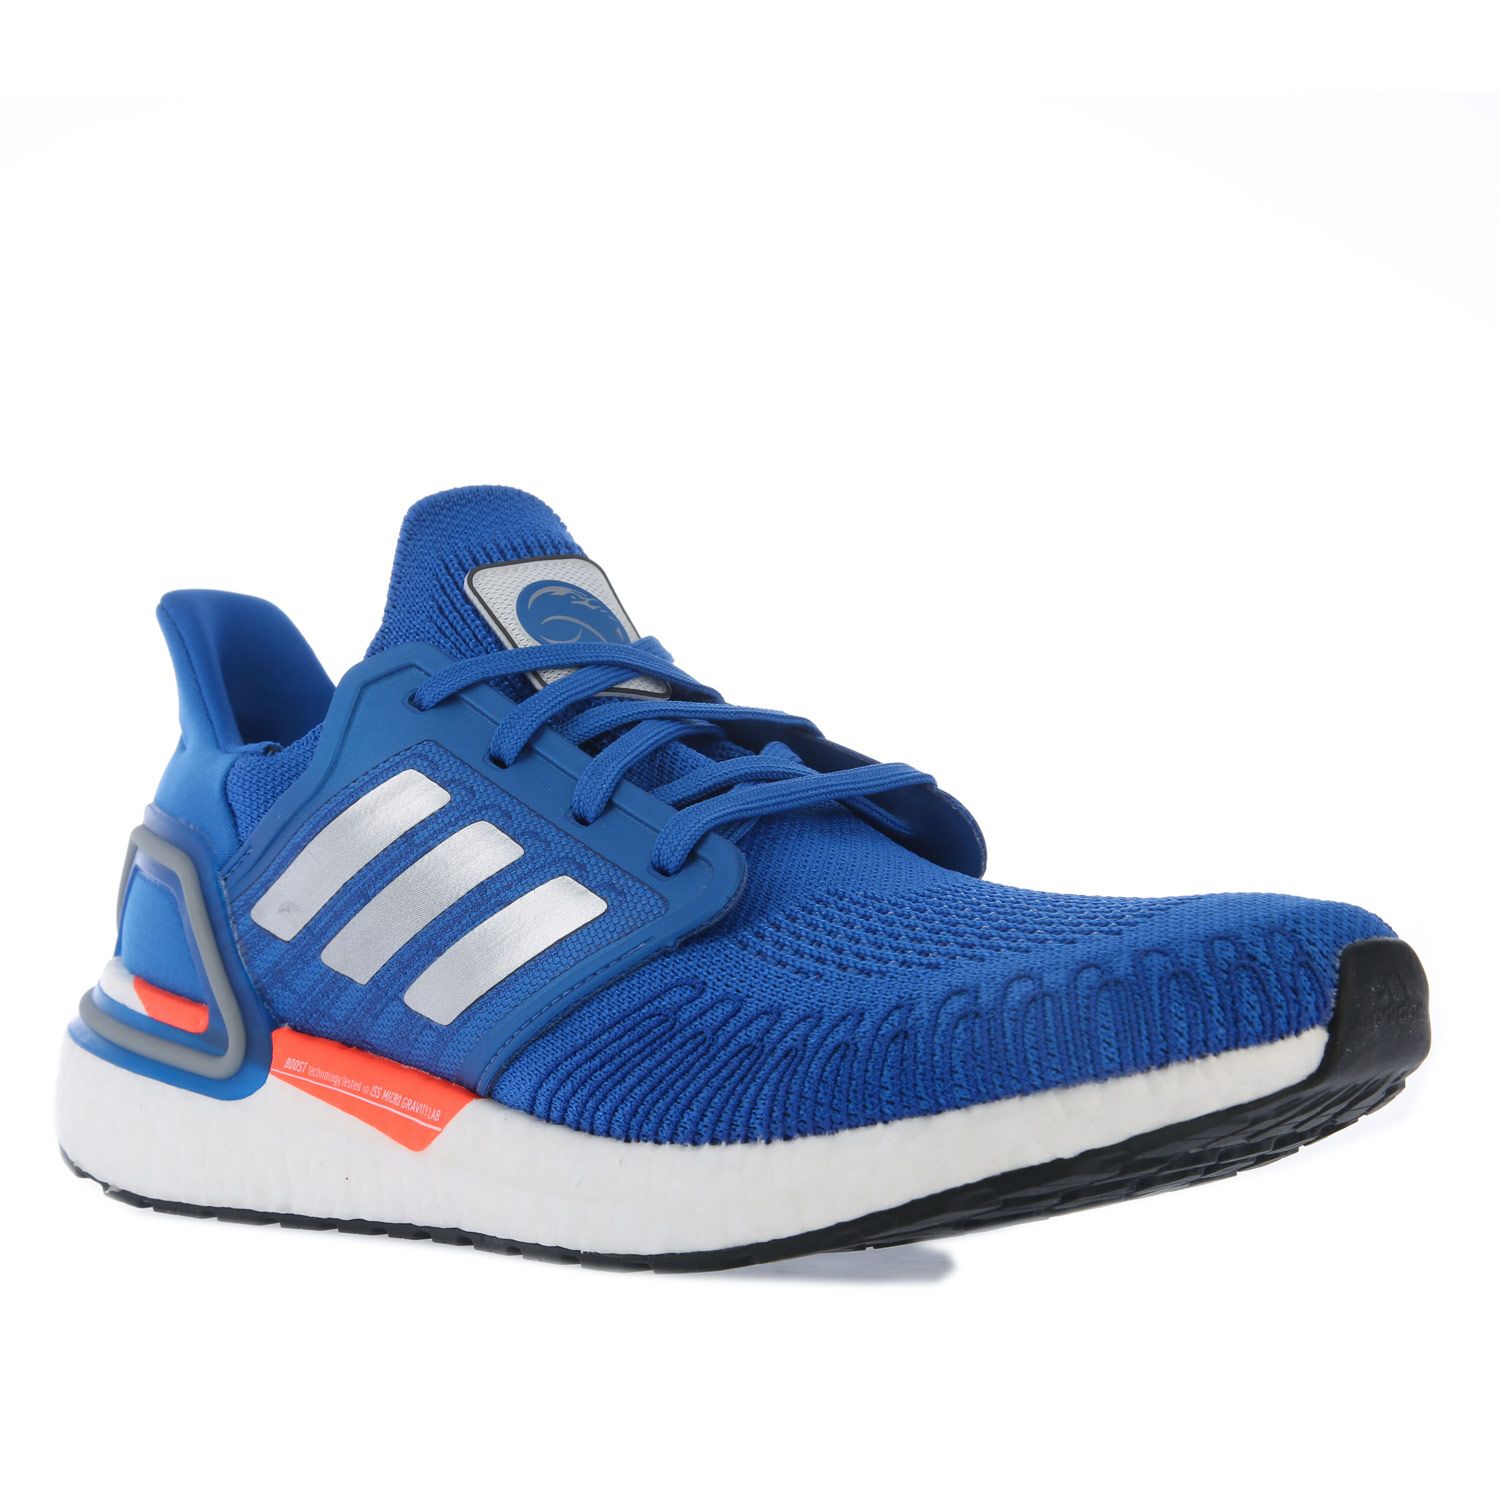 Blue adidas Mens Ultraboost 20 Football Running Shoes - Get The Label